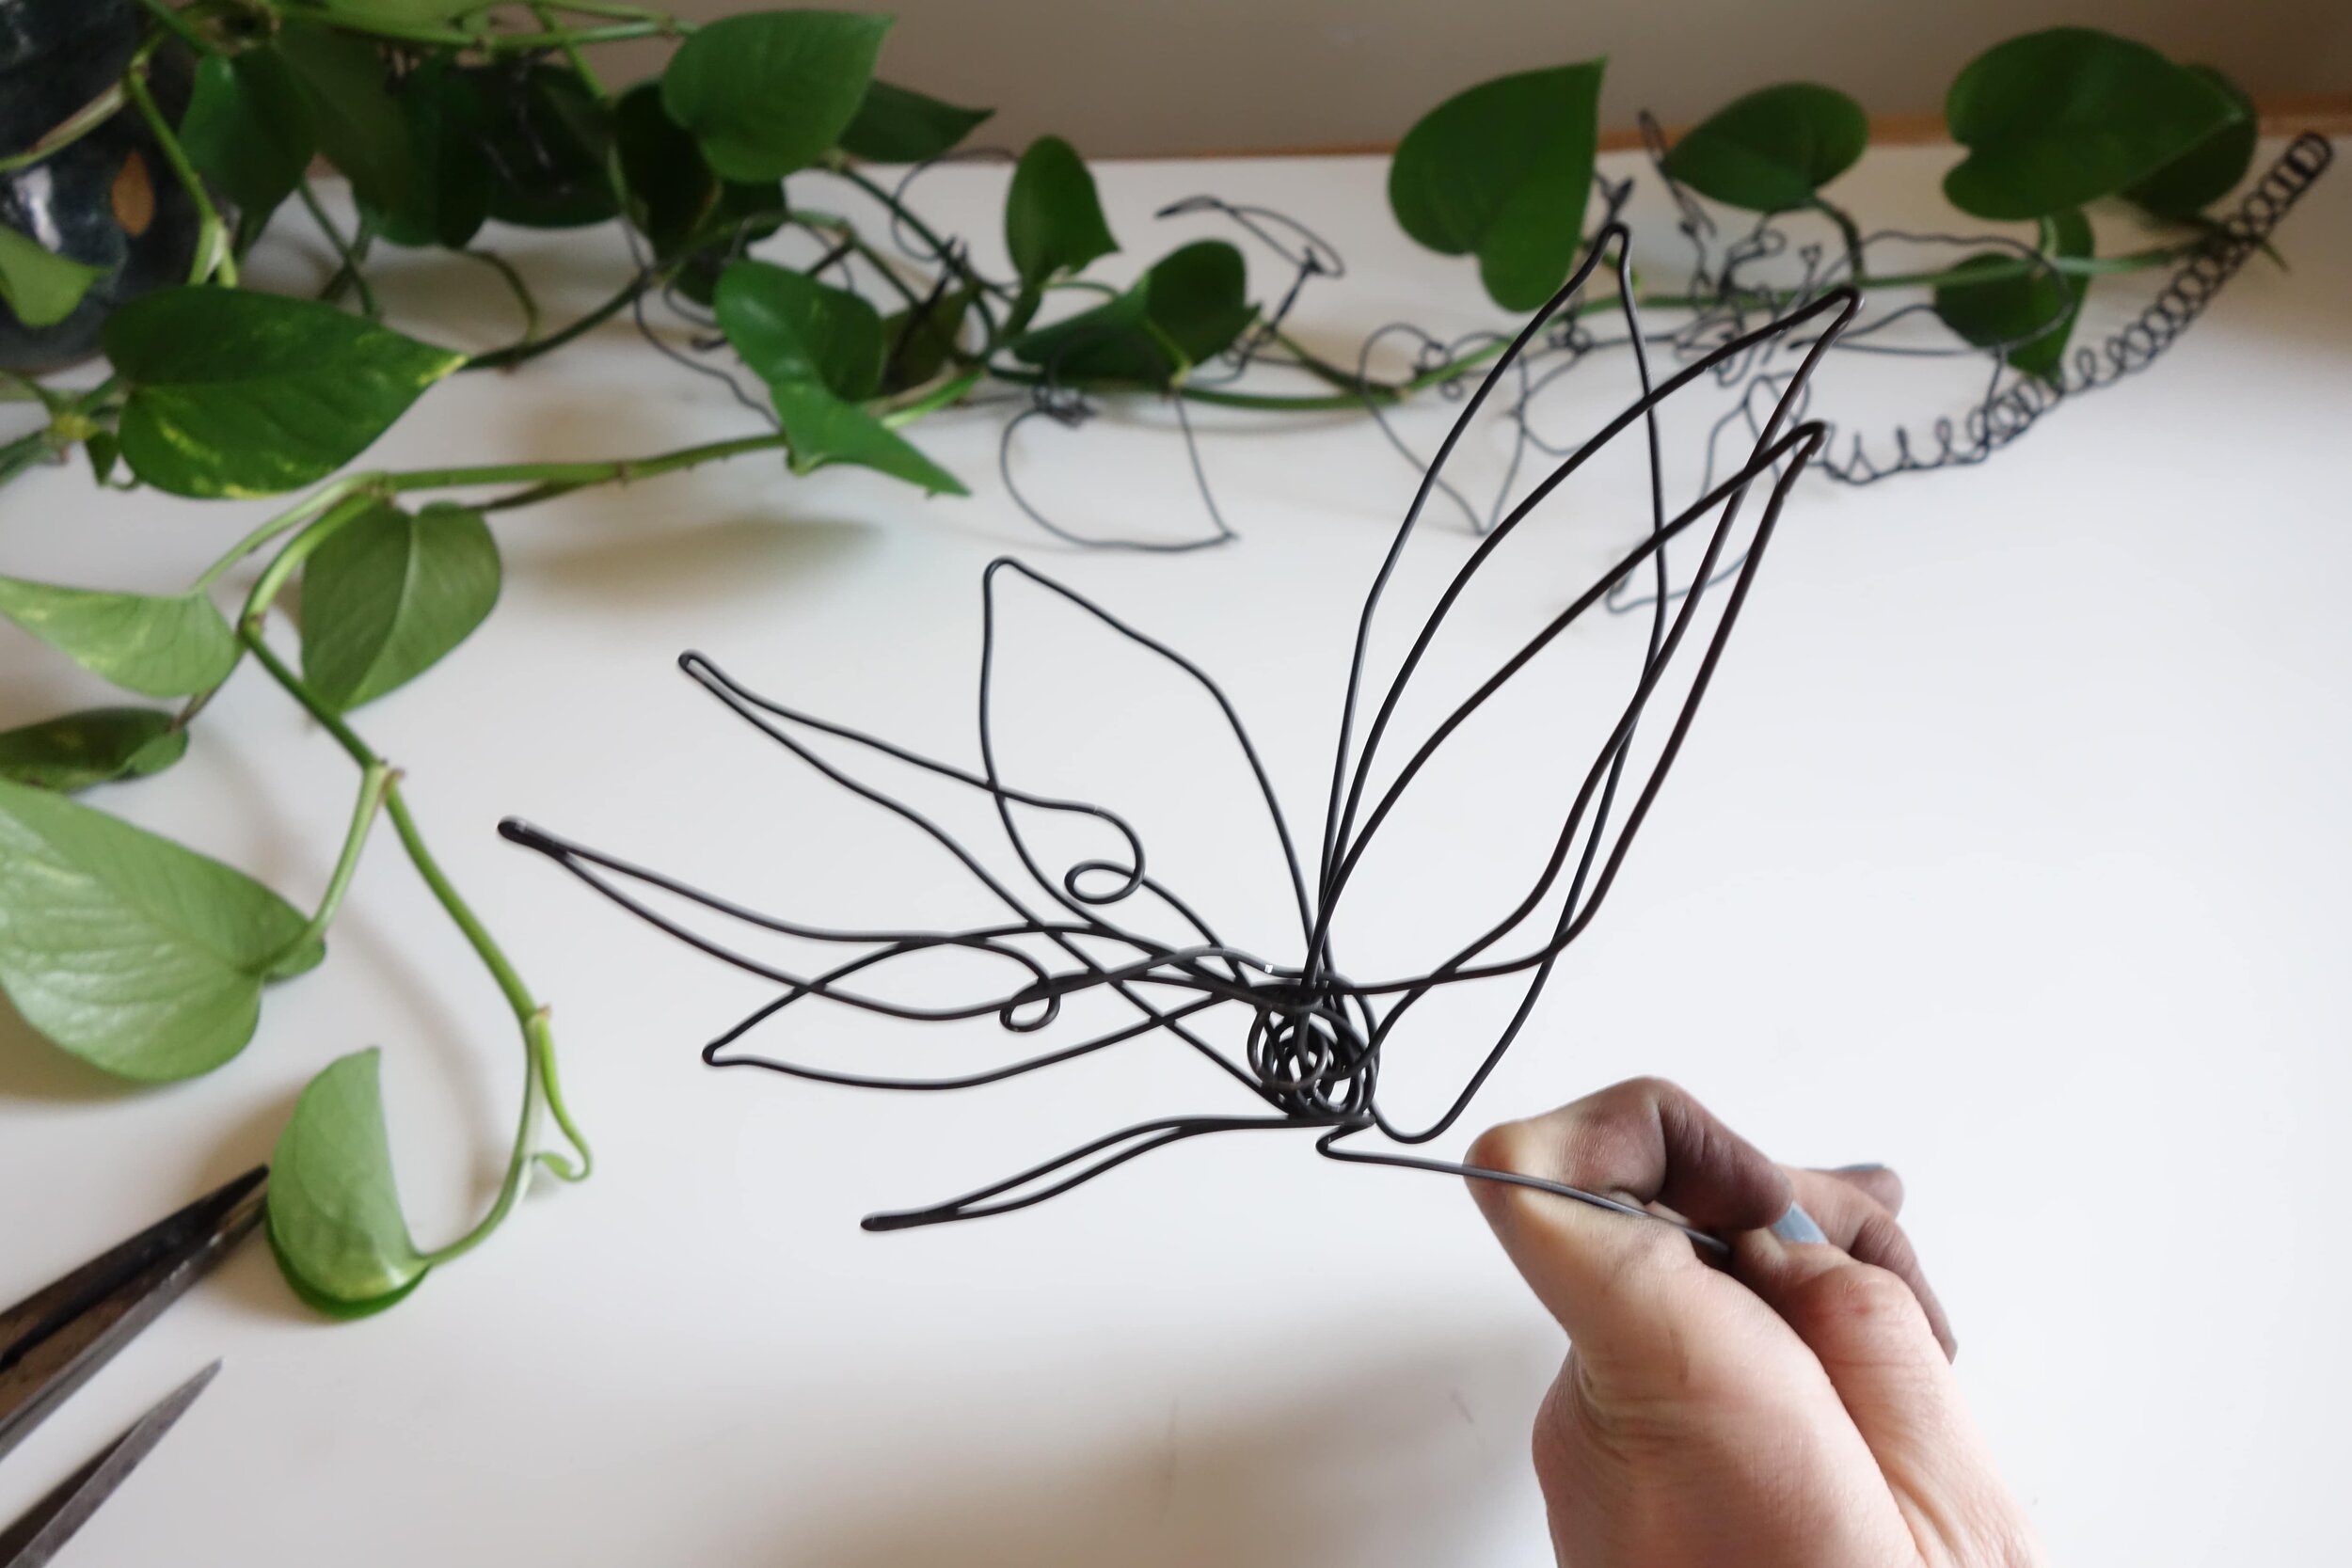 How to Make Wire Flowers